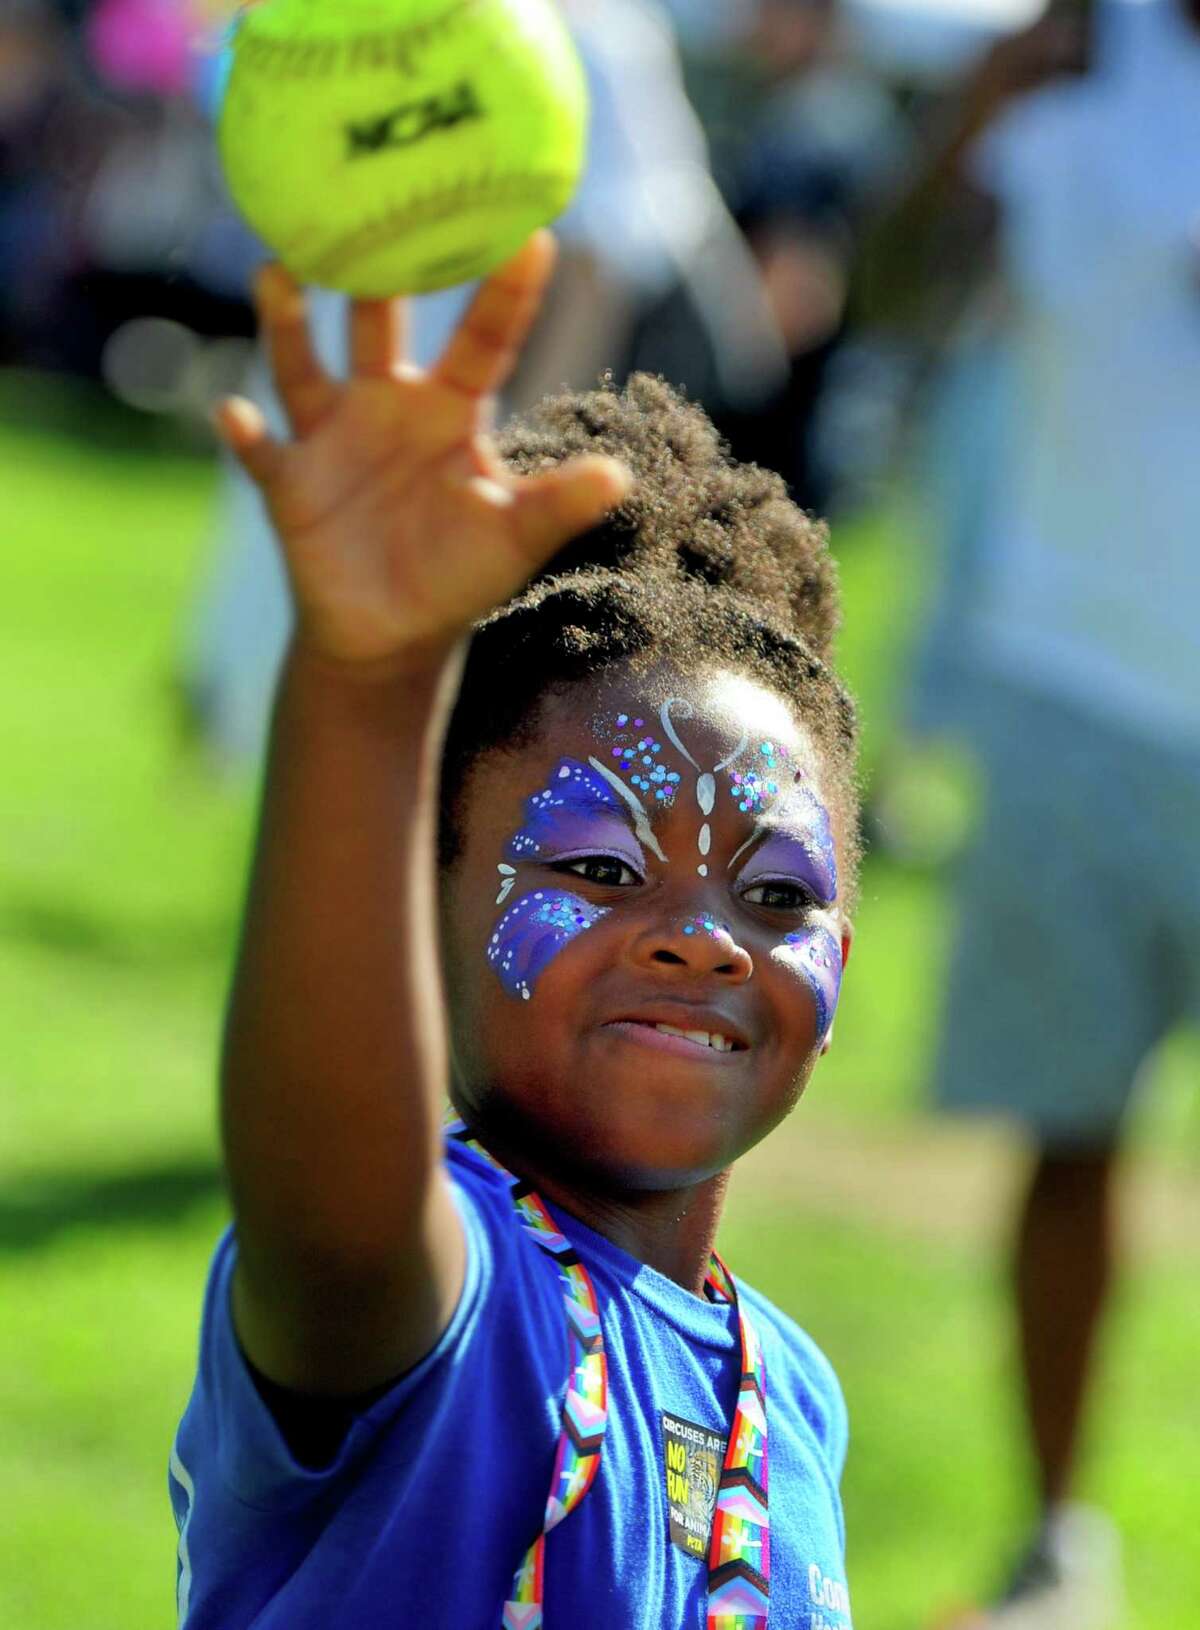 Kaidence Wallace, 8, throws a softball to try and dunk a police officer during Stamford Police Department's annual National Night Out event at Latham Park in Stamford, Conn., on Tuesday August 2, 2022. The event is a "crime prevention program" that emphasizes building stronger partnerships between the community and the department.